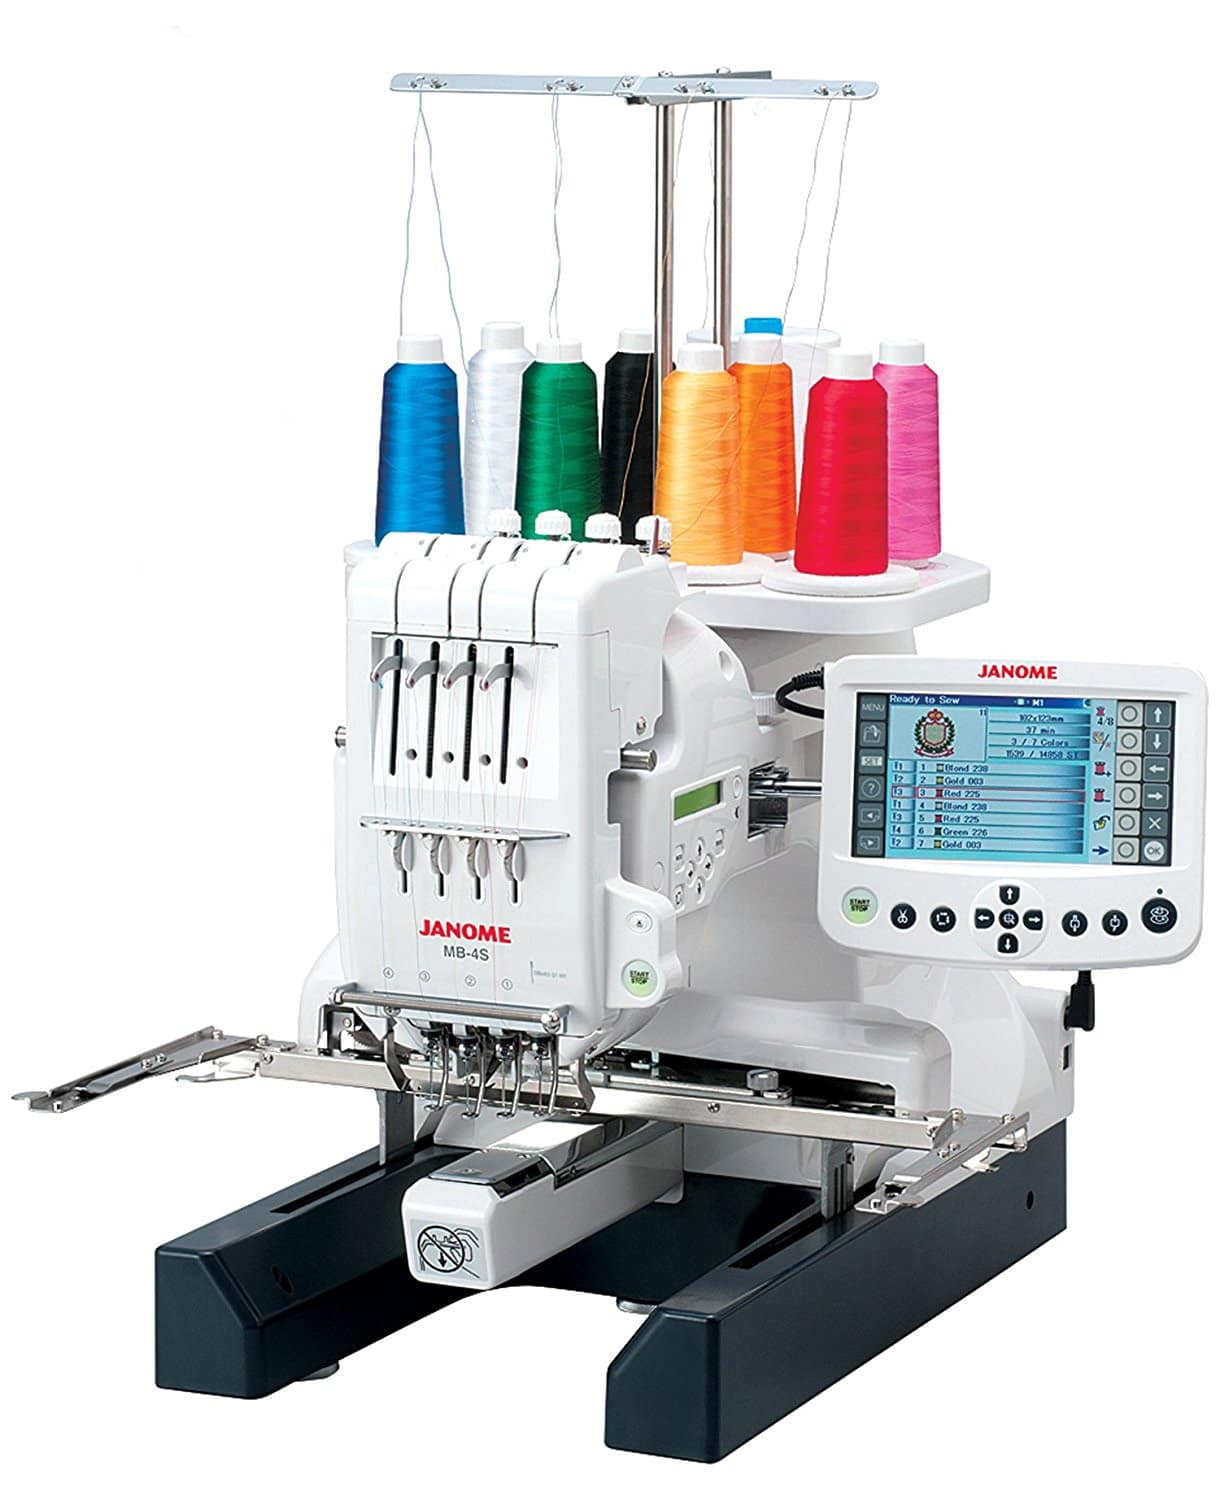 Simthread Embroidery Machine Thread 80 Janome Colors 500M (550Y) Polyester Thread 40wt Compatible with Janome and Robison-Anton Colors